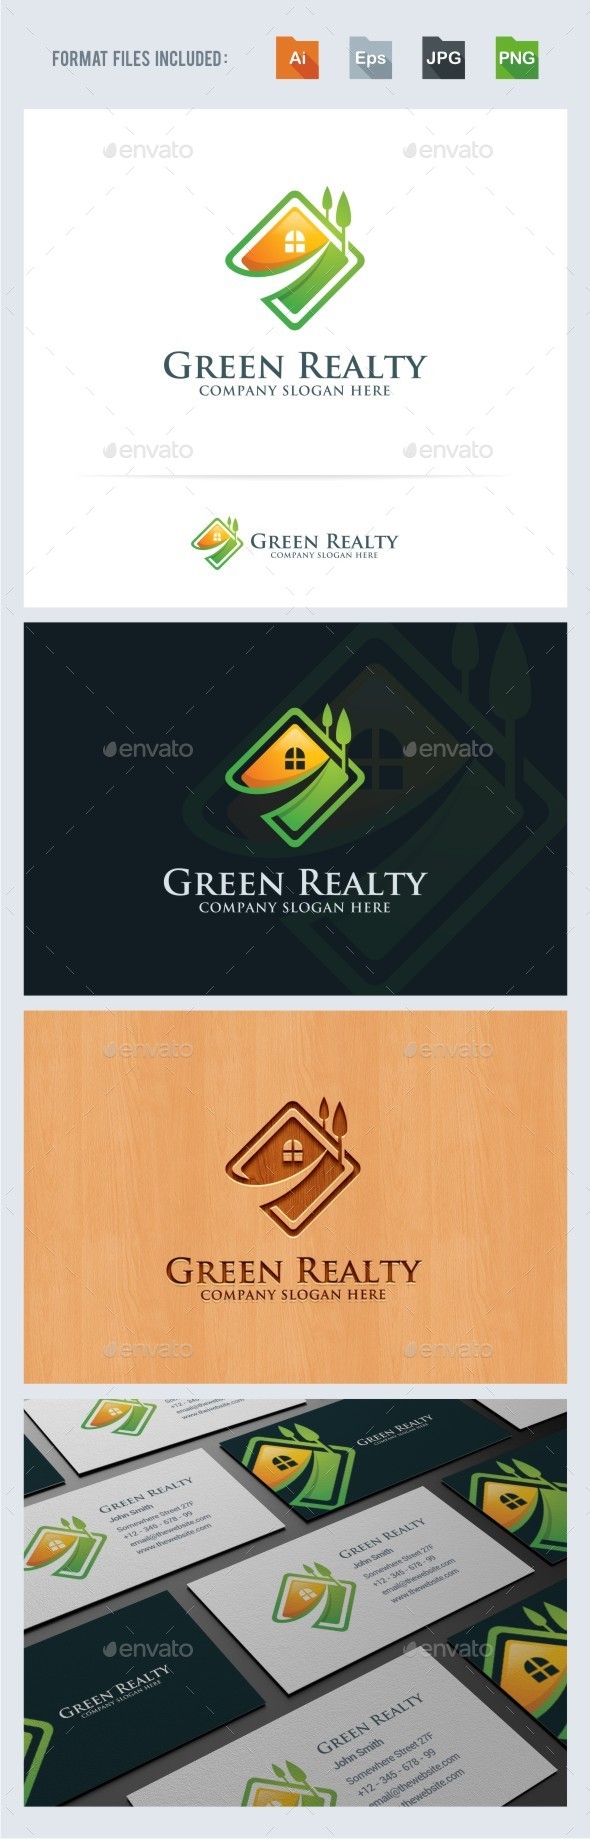 Green Realty - House - Real Estate Logo